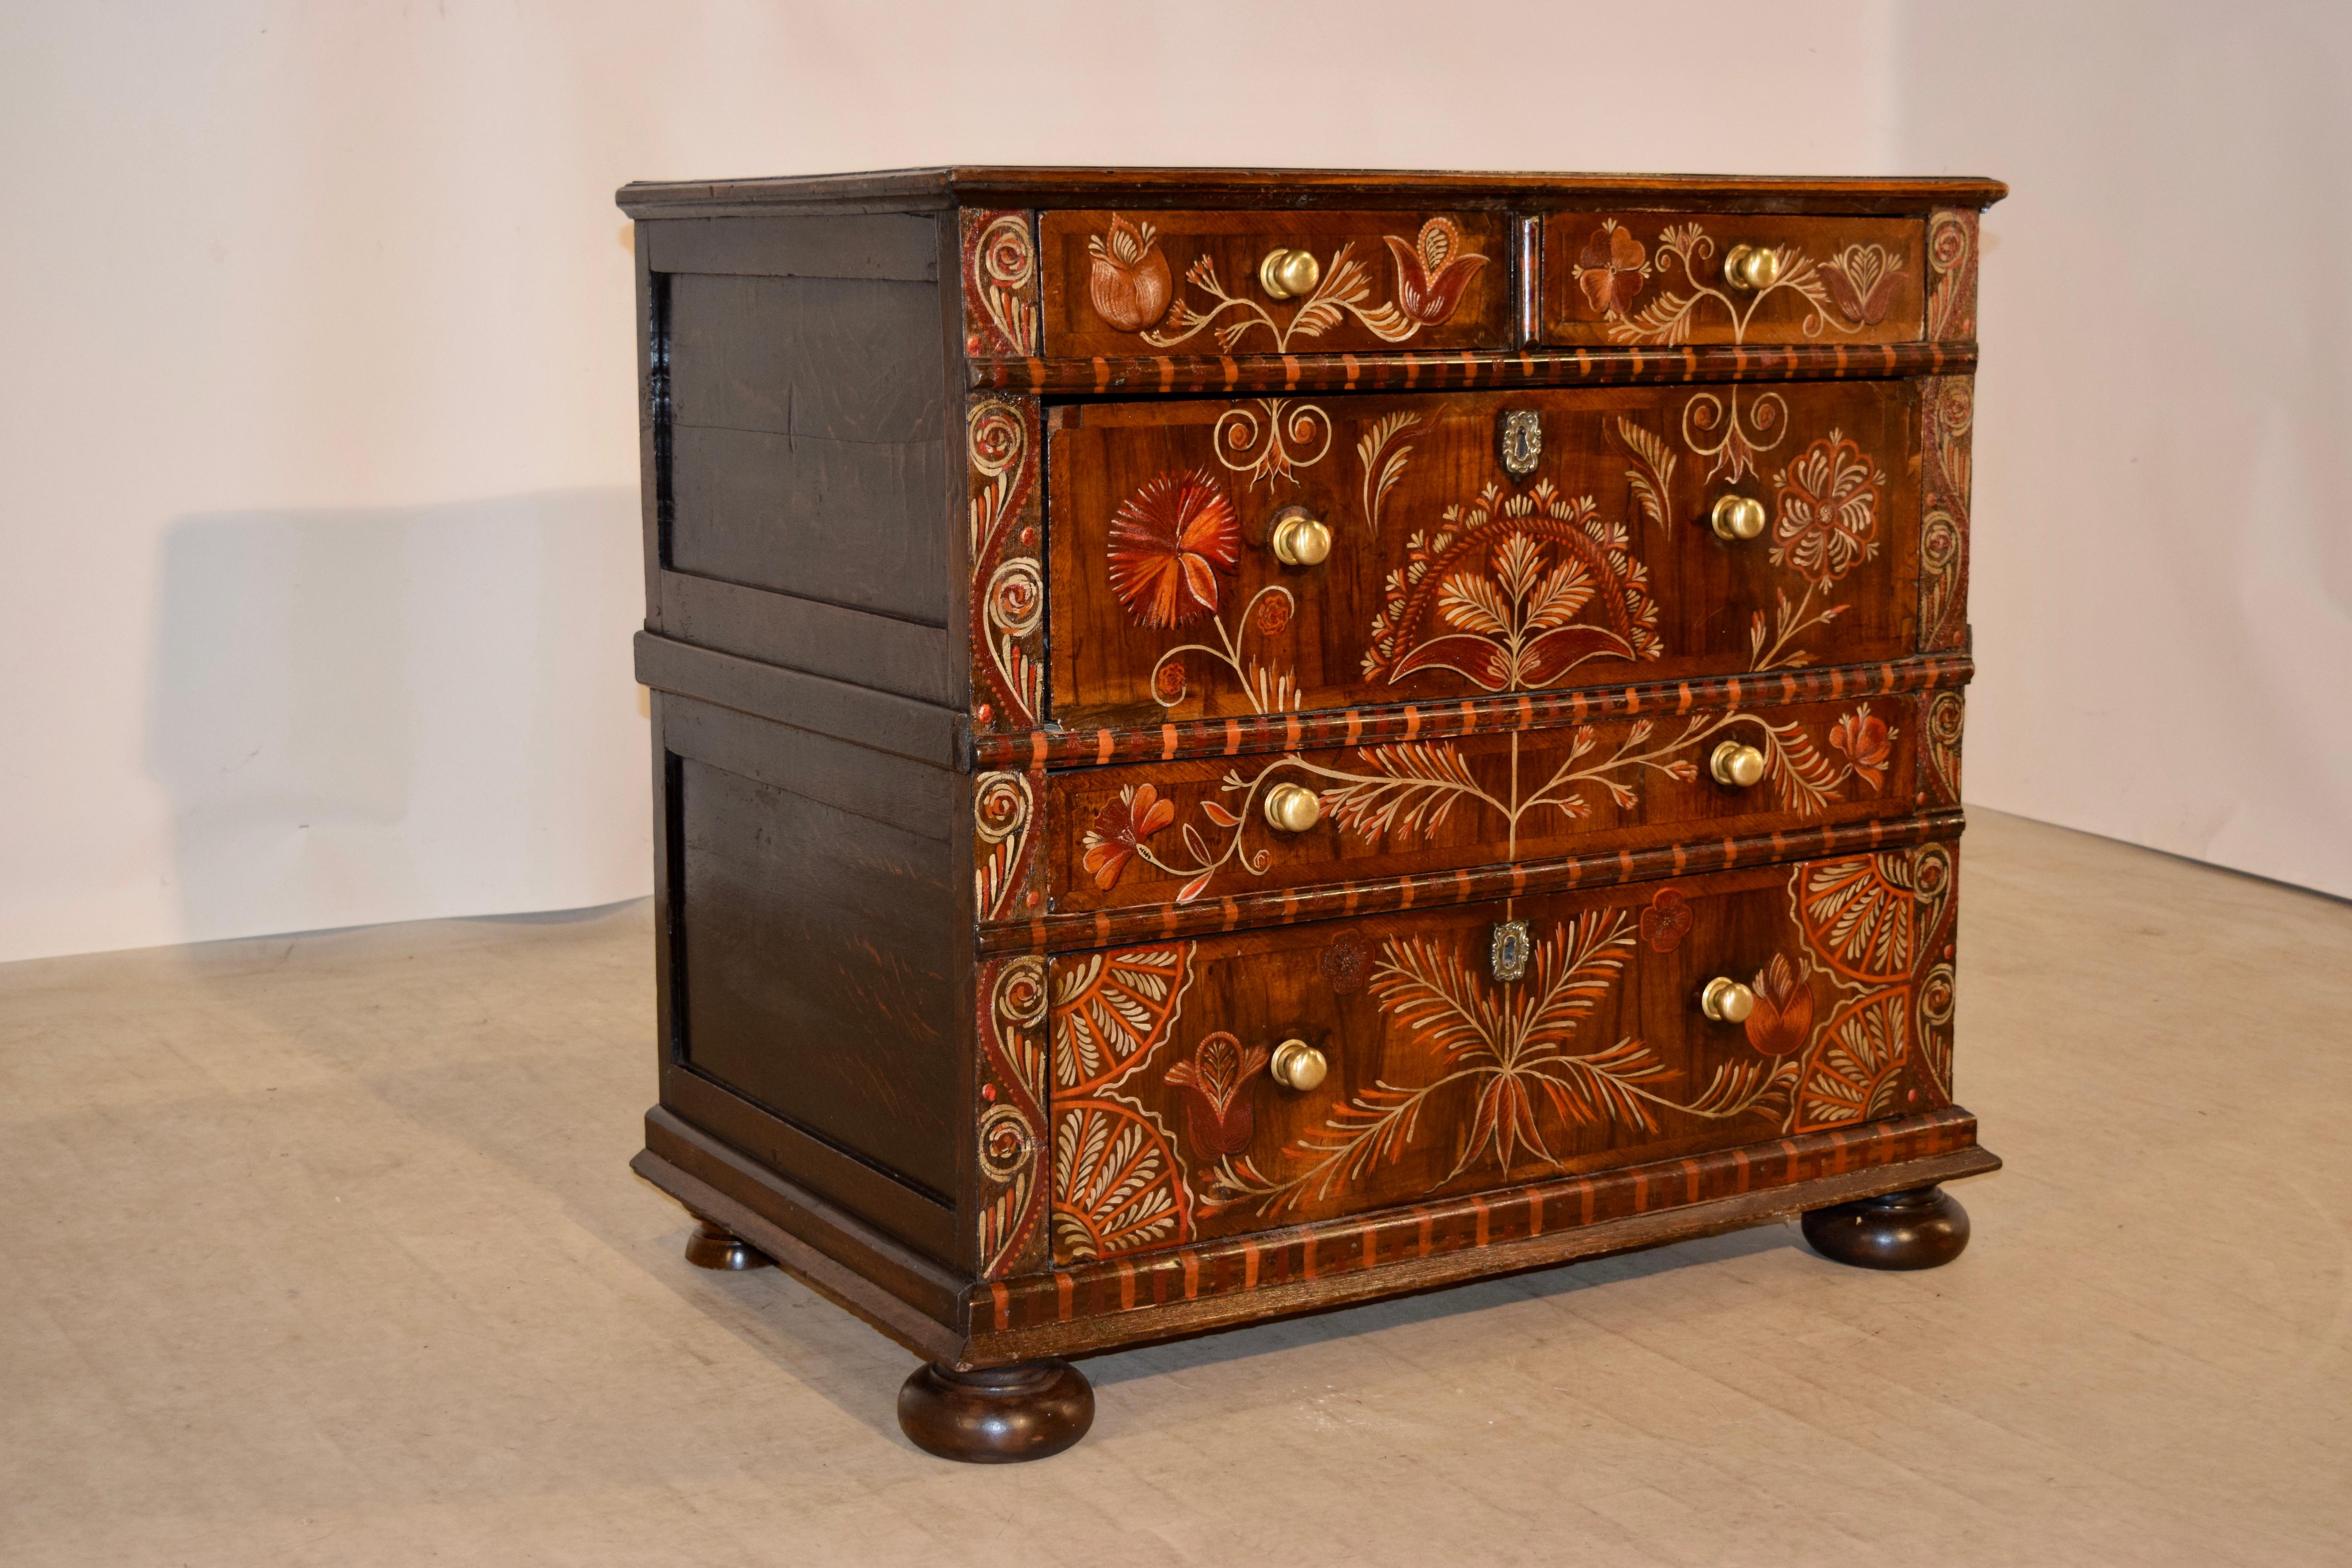 18th century chest of drawers from England with recent decoration in the style of original Jacobean decoration. The top has a bevelled edge and follows down to panelled sides and two small drawers over three larger drawers, of various sizes, all